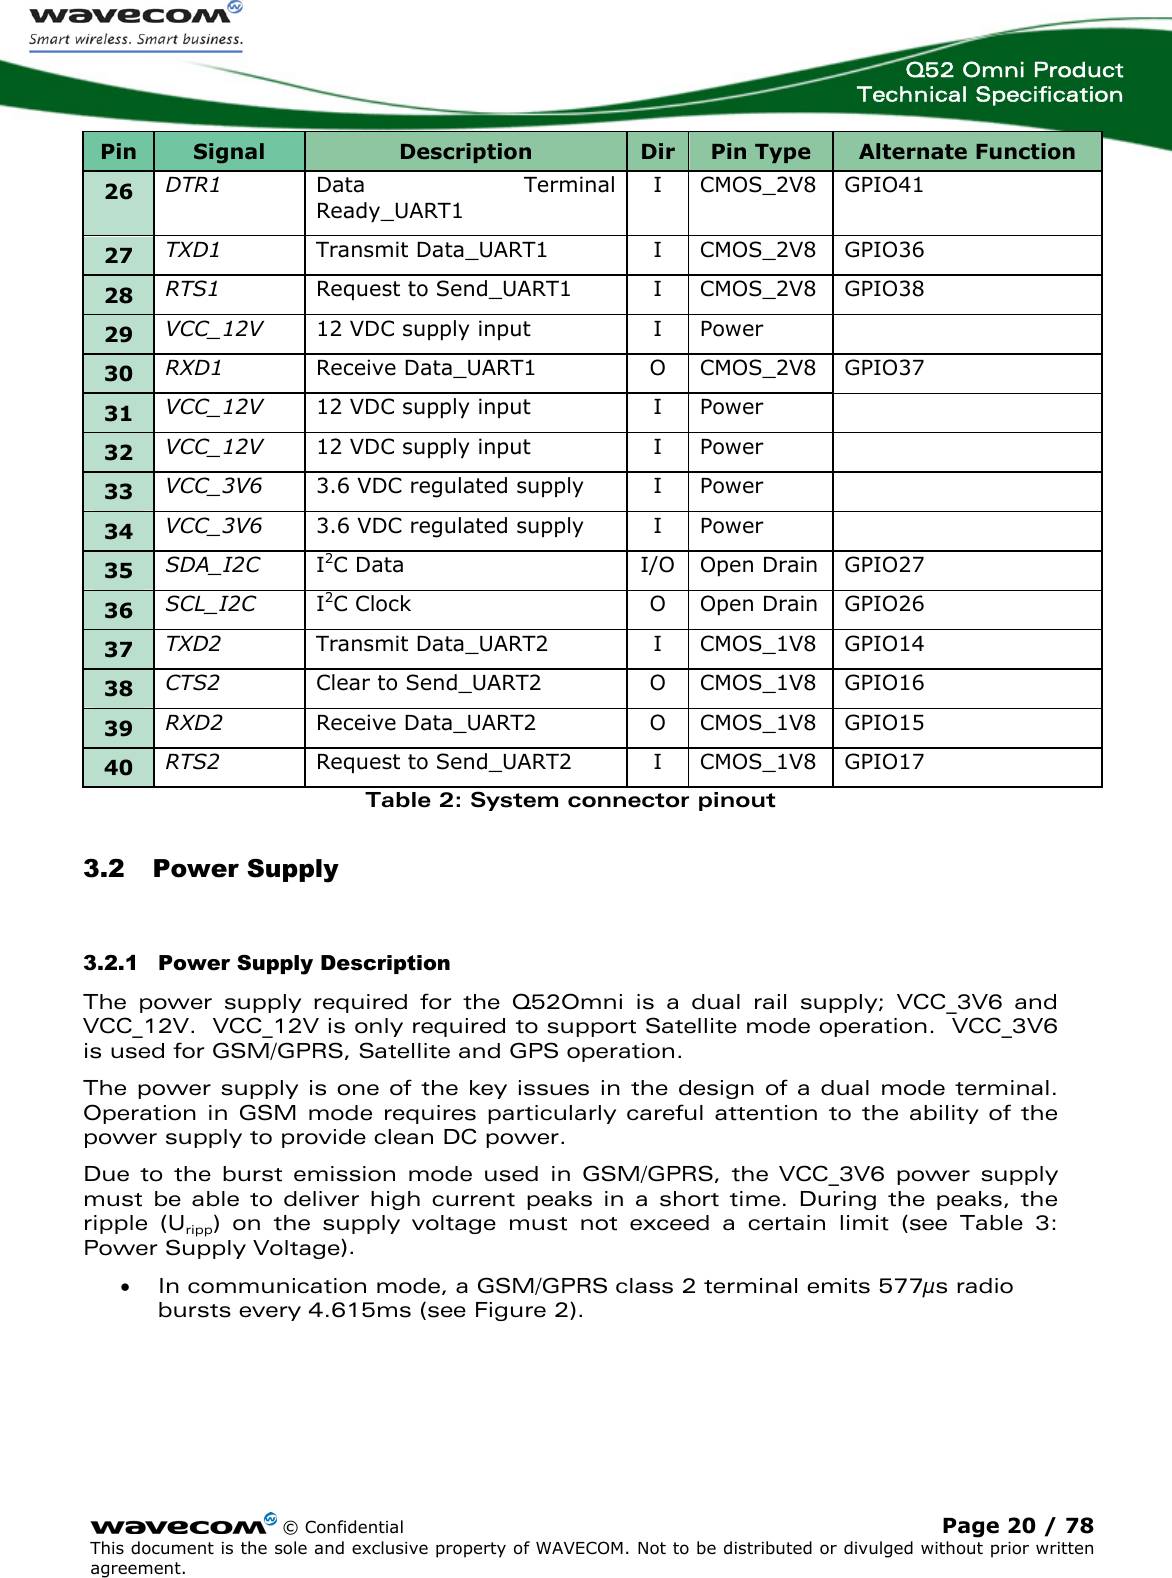  Q52 Omni Product Technical Specification    © Confidential Page 20 / 78 This document is the sole and exclusive property of WAVECOM. Not to be distributed or divulged without prior written agreement.  Pin  Signal  Description  Dir Pin Type  Alternate Function 26  DTR1  Data Terminal Ready_UART1 I  CMOS_2V8  GPIO41 27  TXD1  Transmit Data_UART1  I  CMOS_2V8  GPIO36 28  RTS1  Request to Send_UART1  I  CMOS_2V8  GPIO38 29  VCC_12V  12 VDC supply input  I  Power   30  RXD1  Receive Data_UART1  O  CMOS_2V8  GPIO37 31  VCC_12V  12 VDC supply input  I  Power   32  VCC_12V  12 VDC supply input  I  Power   33  VCC_3V6  3.6 VDC regulated supply  I  Power   34  VCC_3V6  3.6 VDC regulated supply  I  Power   35  SDA_I2C  I2C Data  I/O Open Drain  GPIO27 36  SCL_I2C  I2C Clock  O  Open Drain  GPIO26 37  TXD2  Transmit Data_UART2  I  CMOS_1V8  GPIO14 38  CTS2  Clear to Send_UART2  O  CMOS_1V8  GPIO16 39  RXD2  Receive Data_UART2  O  CMOS_1V8  GPIO15 40  RTS2  Request to Send_UART2  I  CMOS_1V8  GPIO17 Table 2: System connector pinout 3.2 Power Supply 3.2.1 Power Supply Description The power supply required for the Q52Omni is a dual rail supply; VCC_3V6 and VCC_12V.  VCC_12V is only required to support Satellite mode operation.  VCC_3V6 is used for GSM/GPRS, Satellite and GPS operation. The power supply is one of the key issues in the design of a dual mode terminal. Operation in GSM mode requires particularly careful attention to the ability of the power supply to provide clean DC power. Due to the burst emission mode used in GSM/GPRS, the VCC_3V6 power supply must be able to deliver high current peaks in a short time. During the peaks, the ripple (Uripp) on the supply voltage must not exceed a certain limit (see Table 3: Power Supply Voltage).  • In communication mode, a GSM/GPRS class 2 terminal emits 577μs radio bursts every 4.615ms (see Figure 2). 